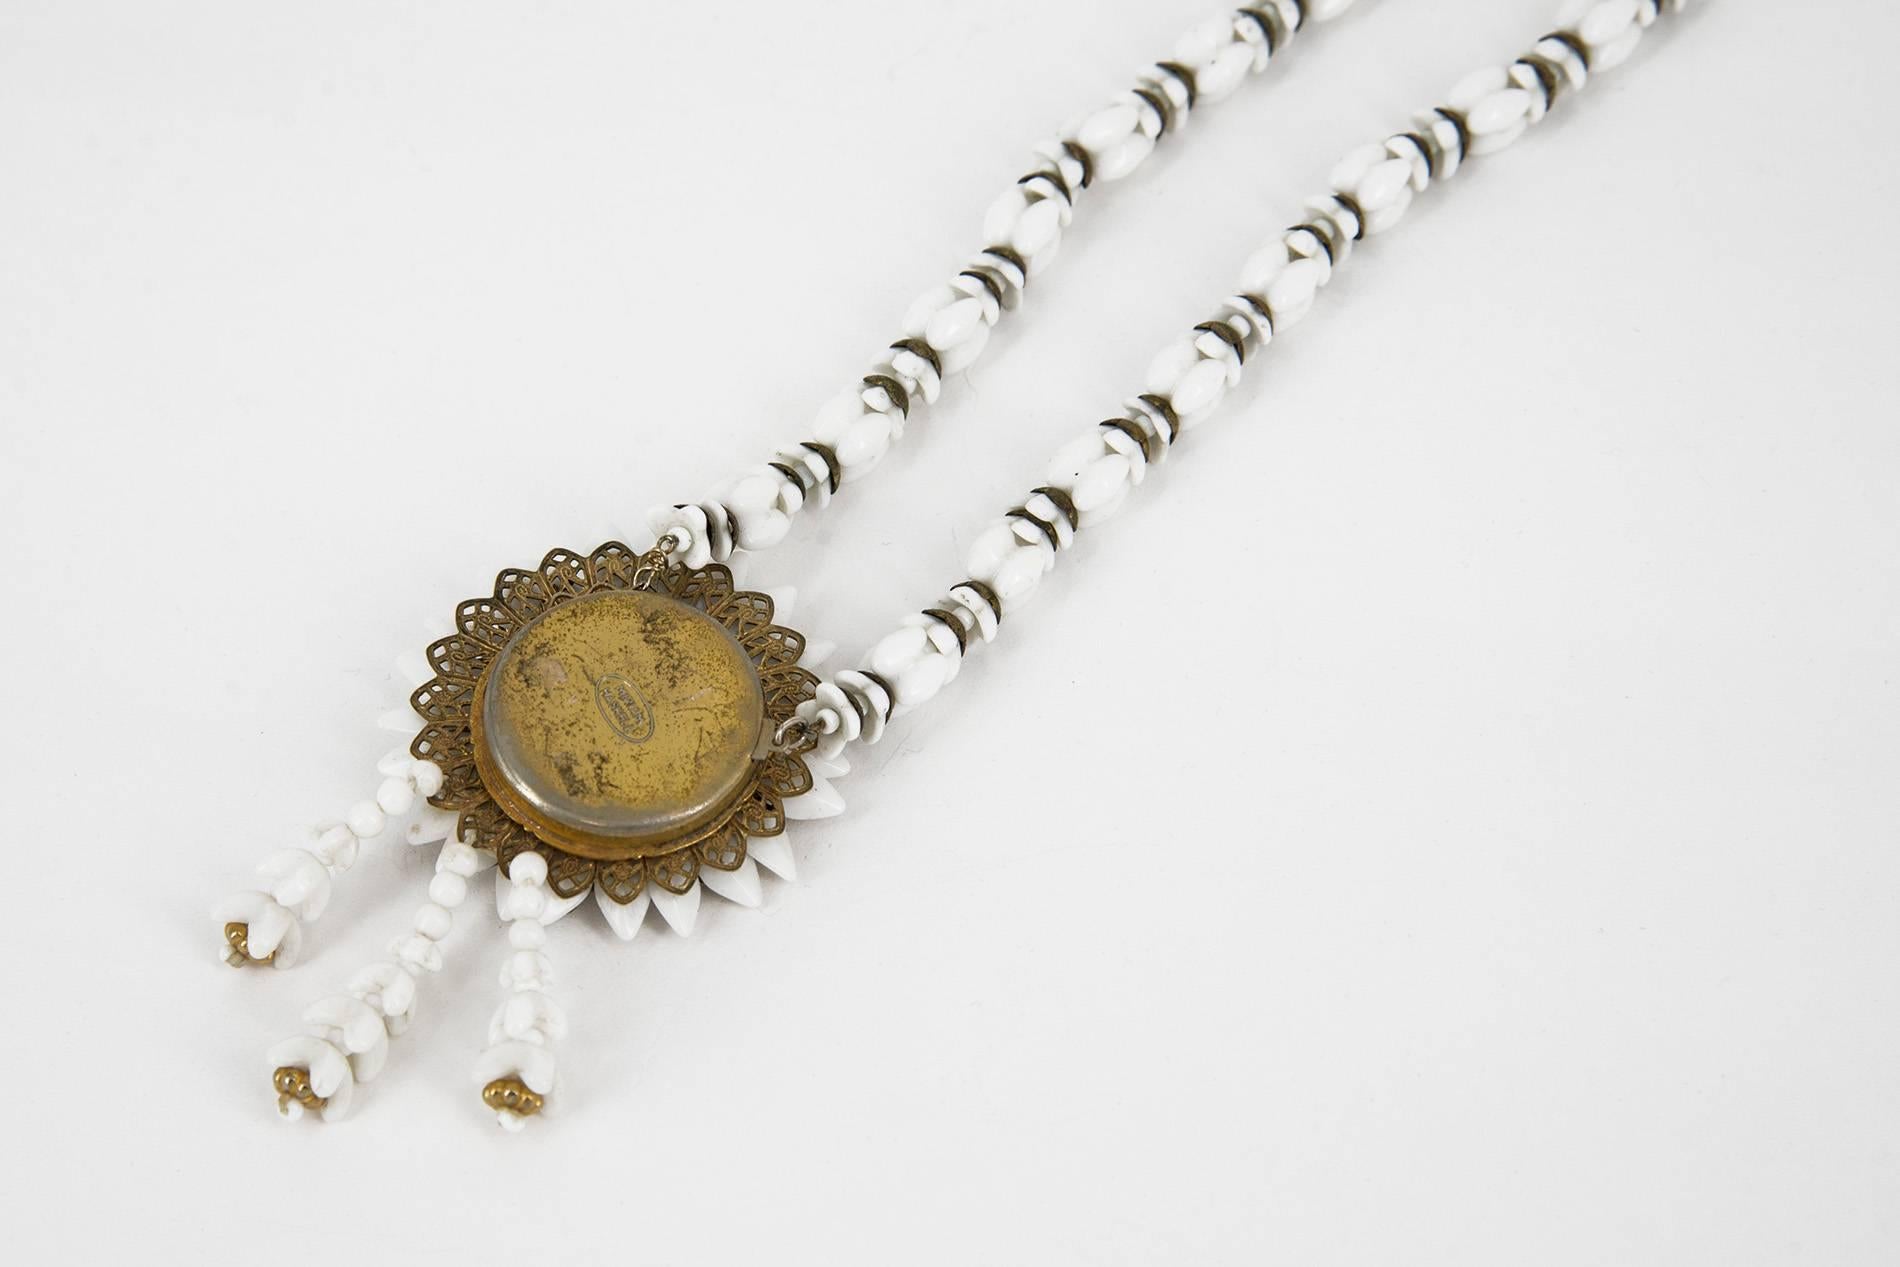 Elegant necklace designed by Miriam Haskell in the 1940s. White glass beads and metal. Good original vintage conditions.